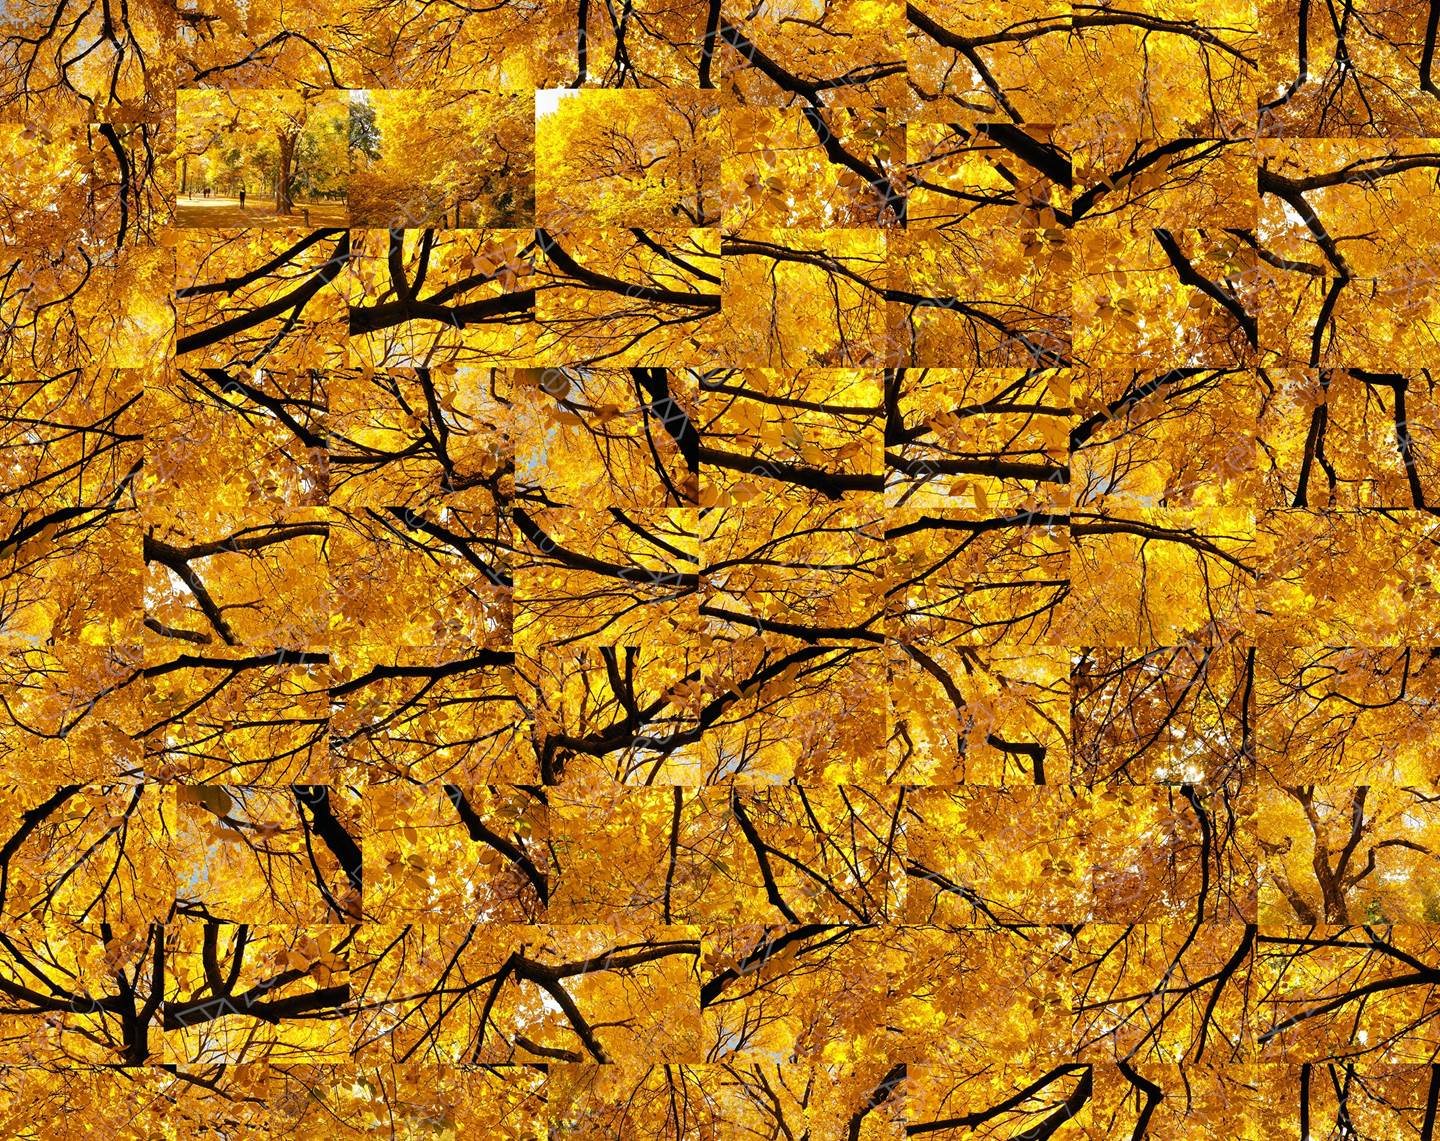 Fall - Yellow Jazz , original Nature Digital Photography by Shimon and Tammar Rothstein 